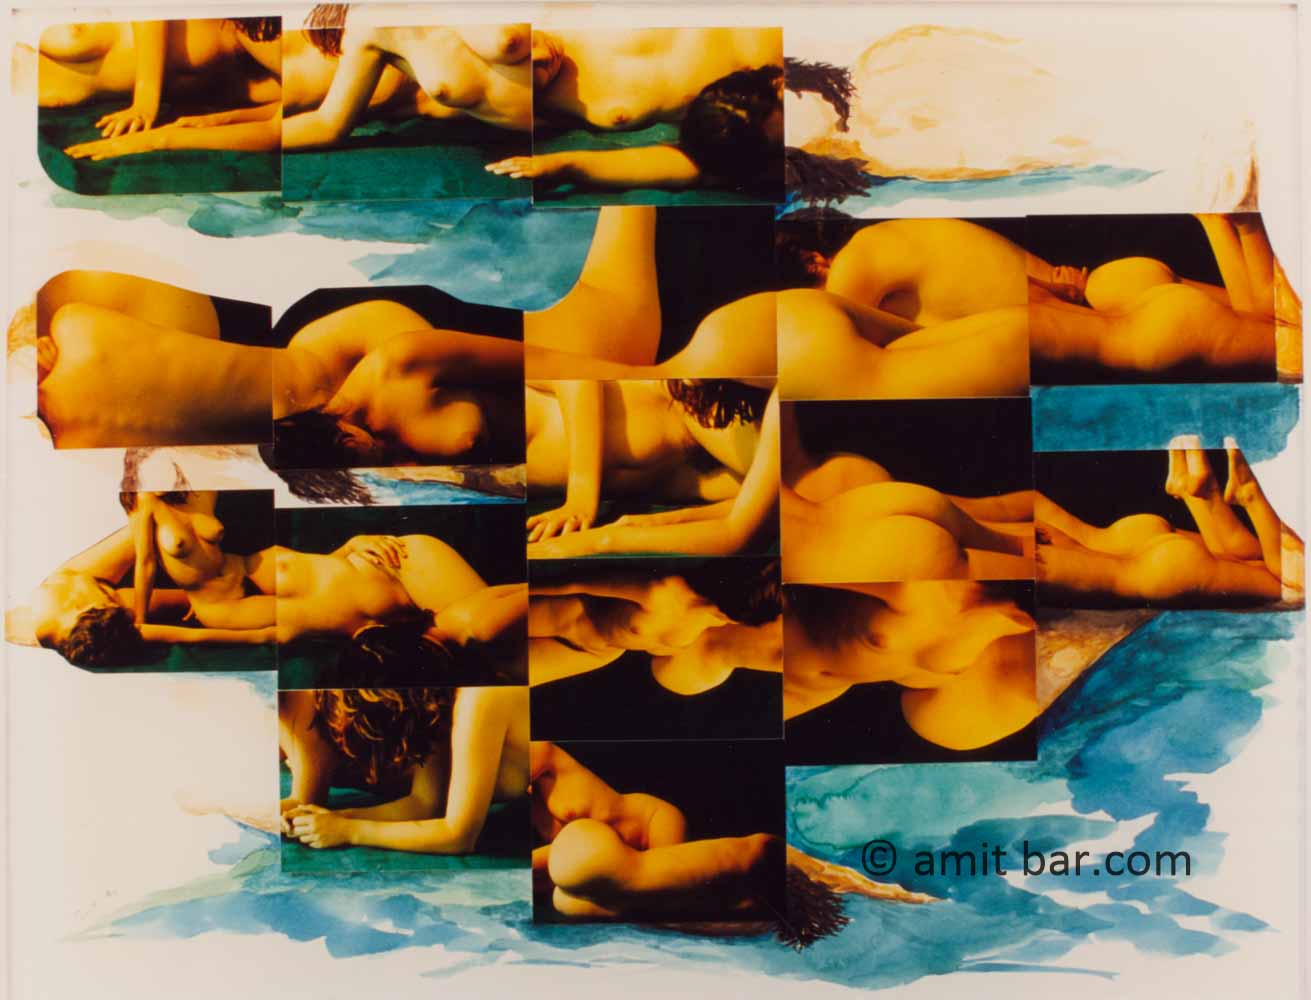 Two nudes: Collage of two nudes, photographs and aquarelle